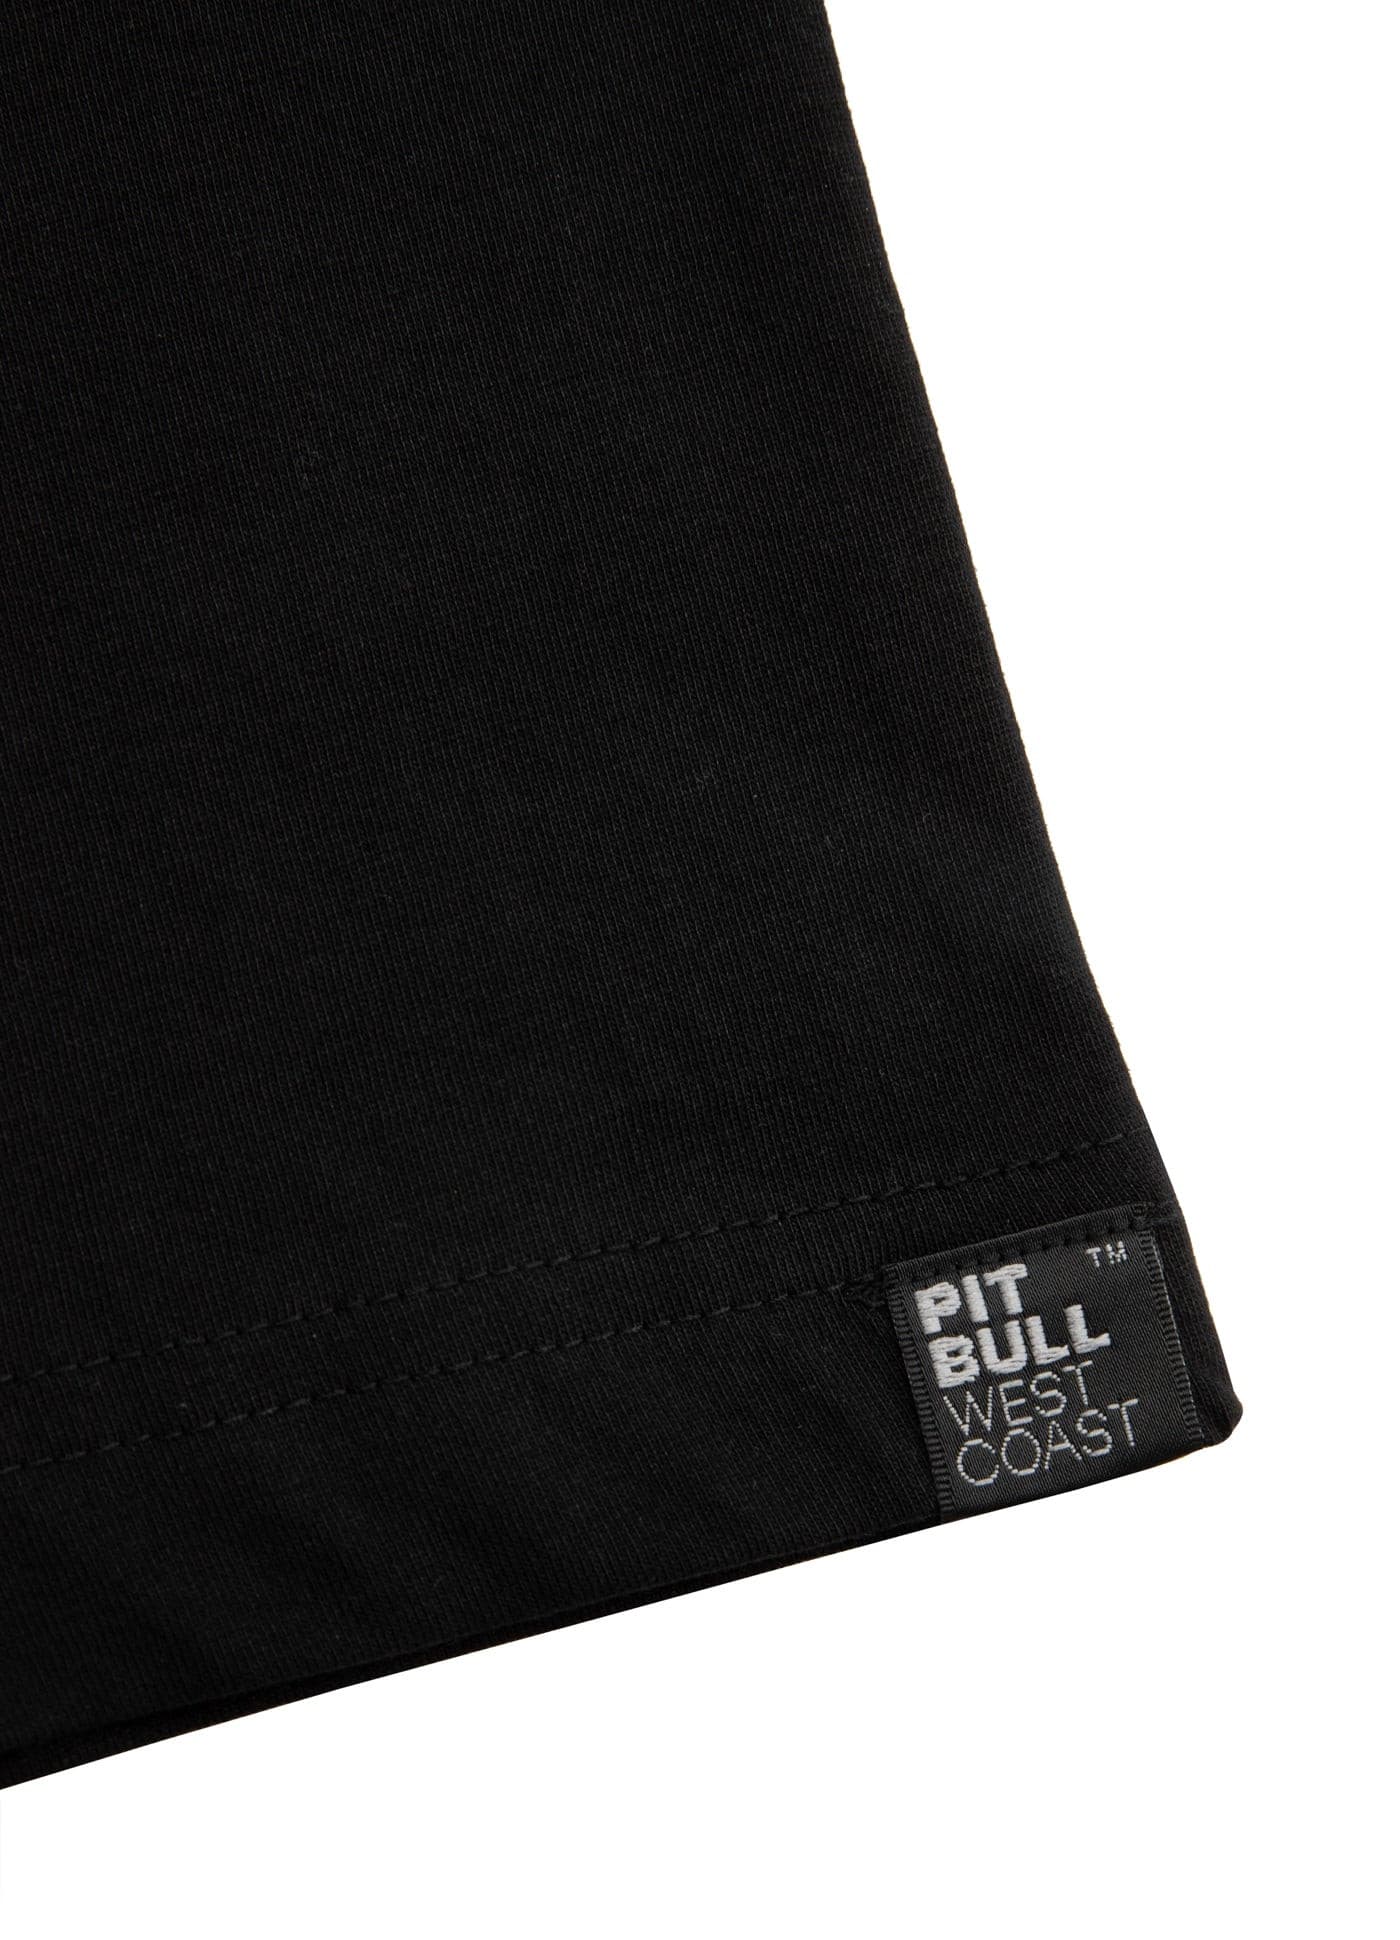 Buy Official ADCC Black T-Shirt | Pitbull Store